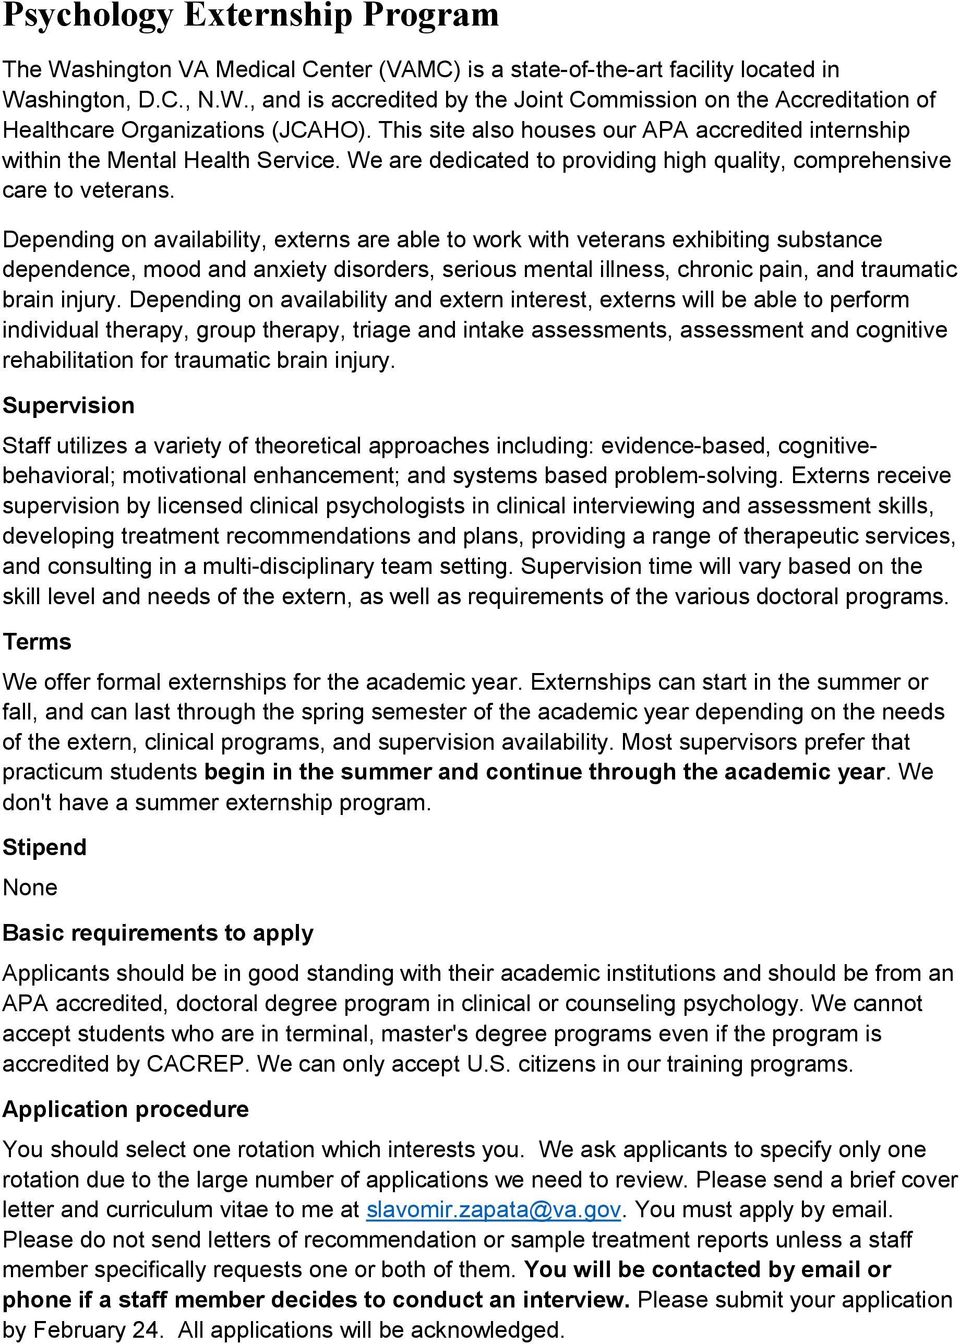 Depending on availability, externs are able to work with veterans exhibiting substance dependence, mood and anxiety disorders, serious mental illness, chronic pain, and traumatic brain injury.